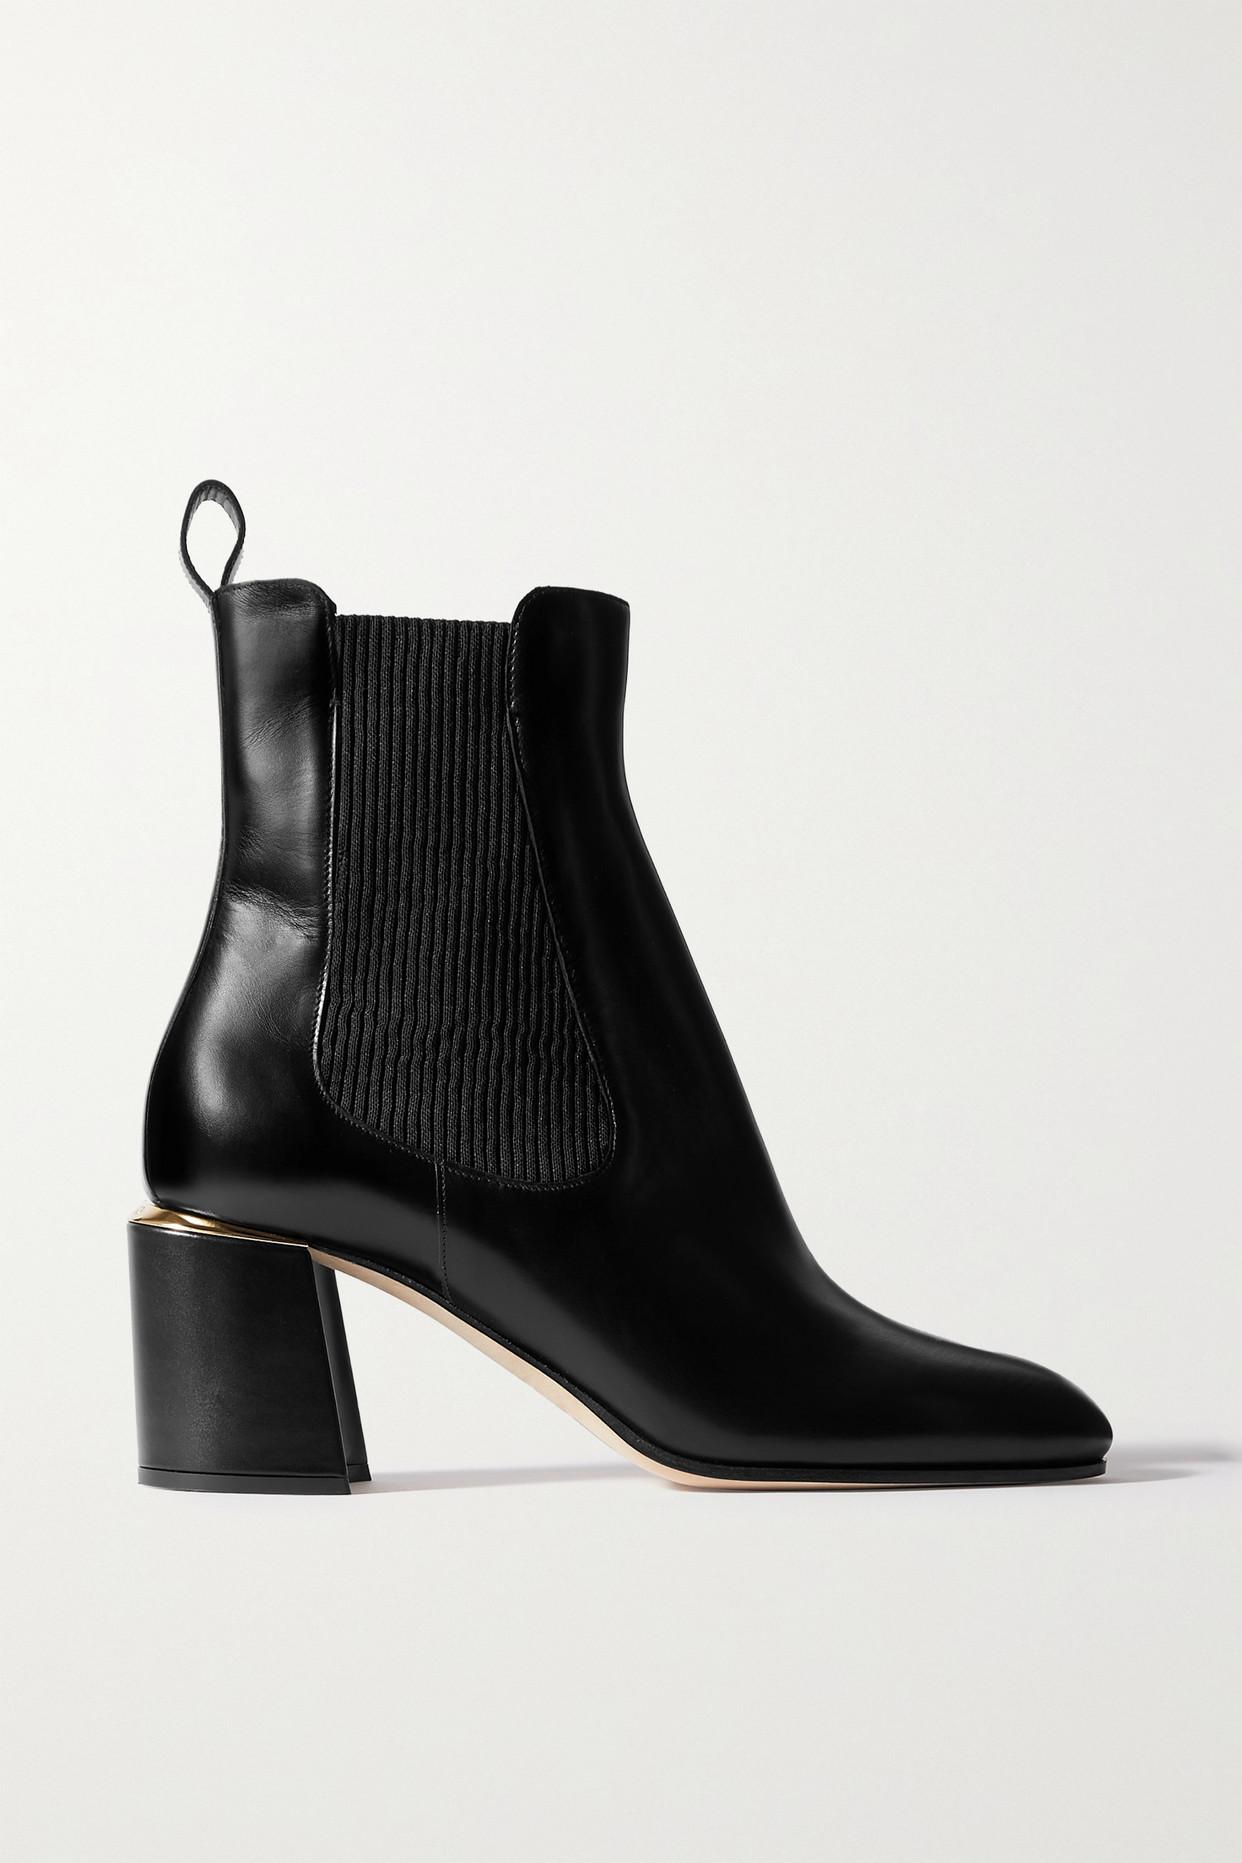 Jimmy Choo Thessaly 65 Leather Ankle Boots in Black | Lyst